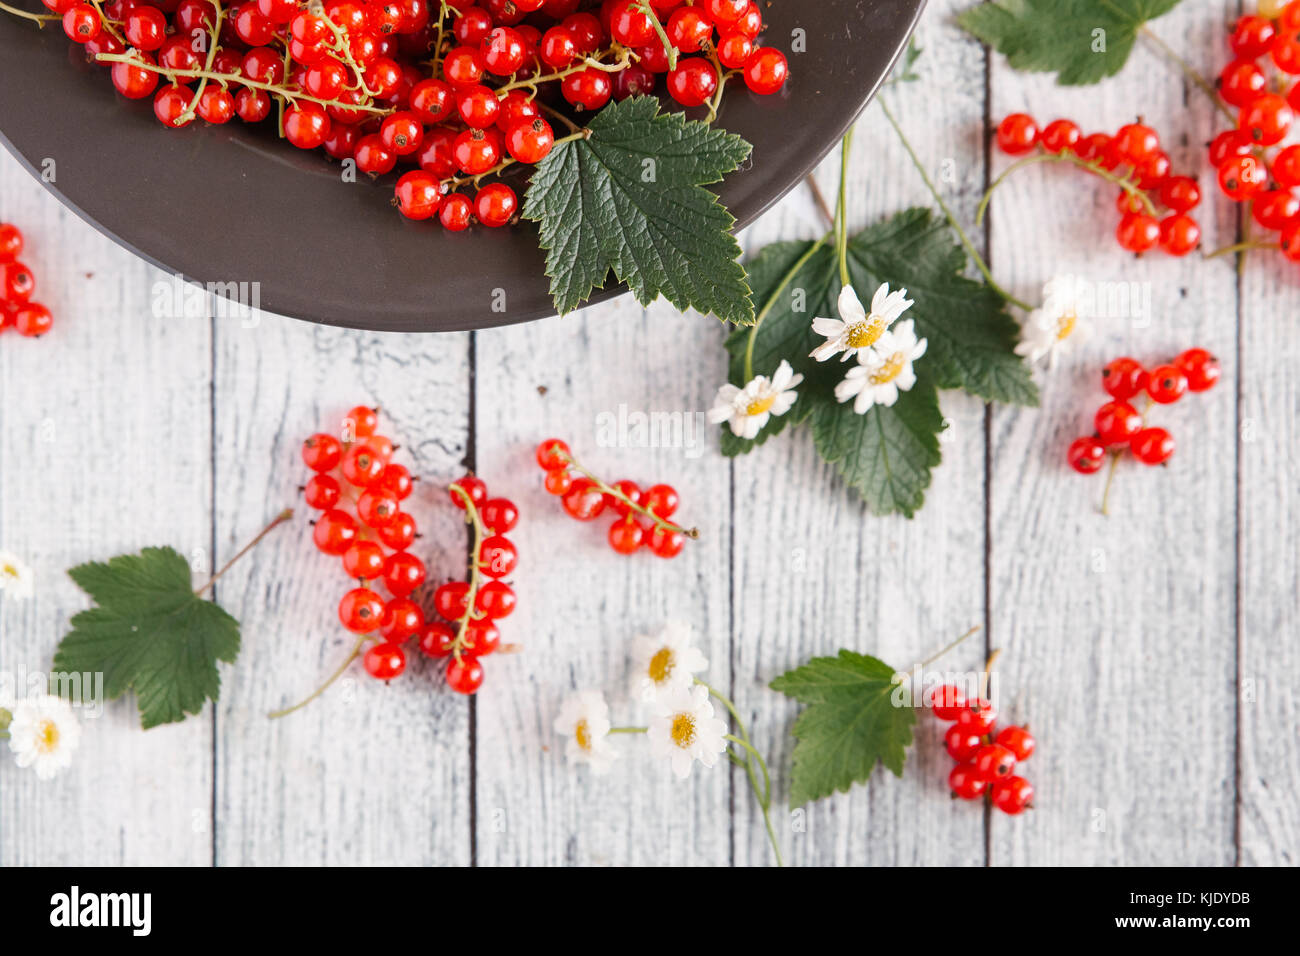 Red berries and leaves on table with flowers Stock Photo